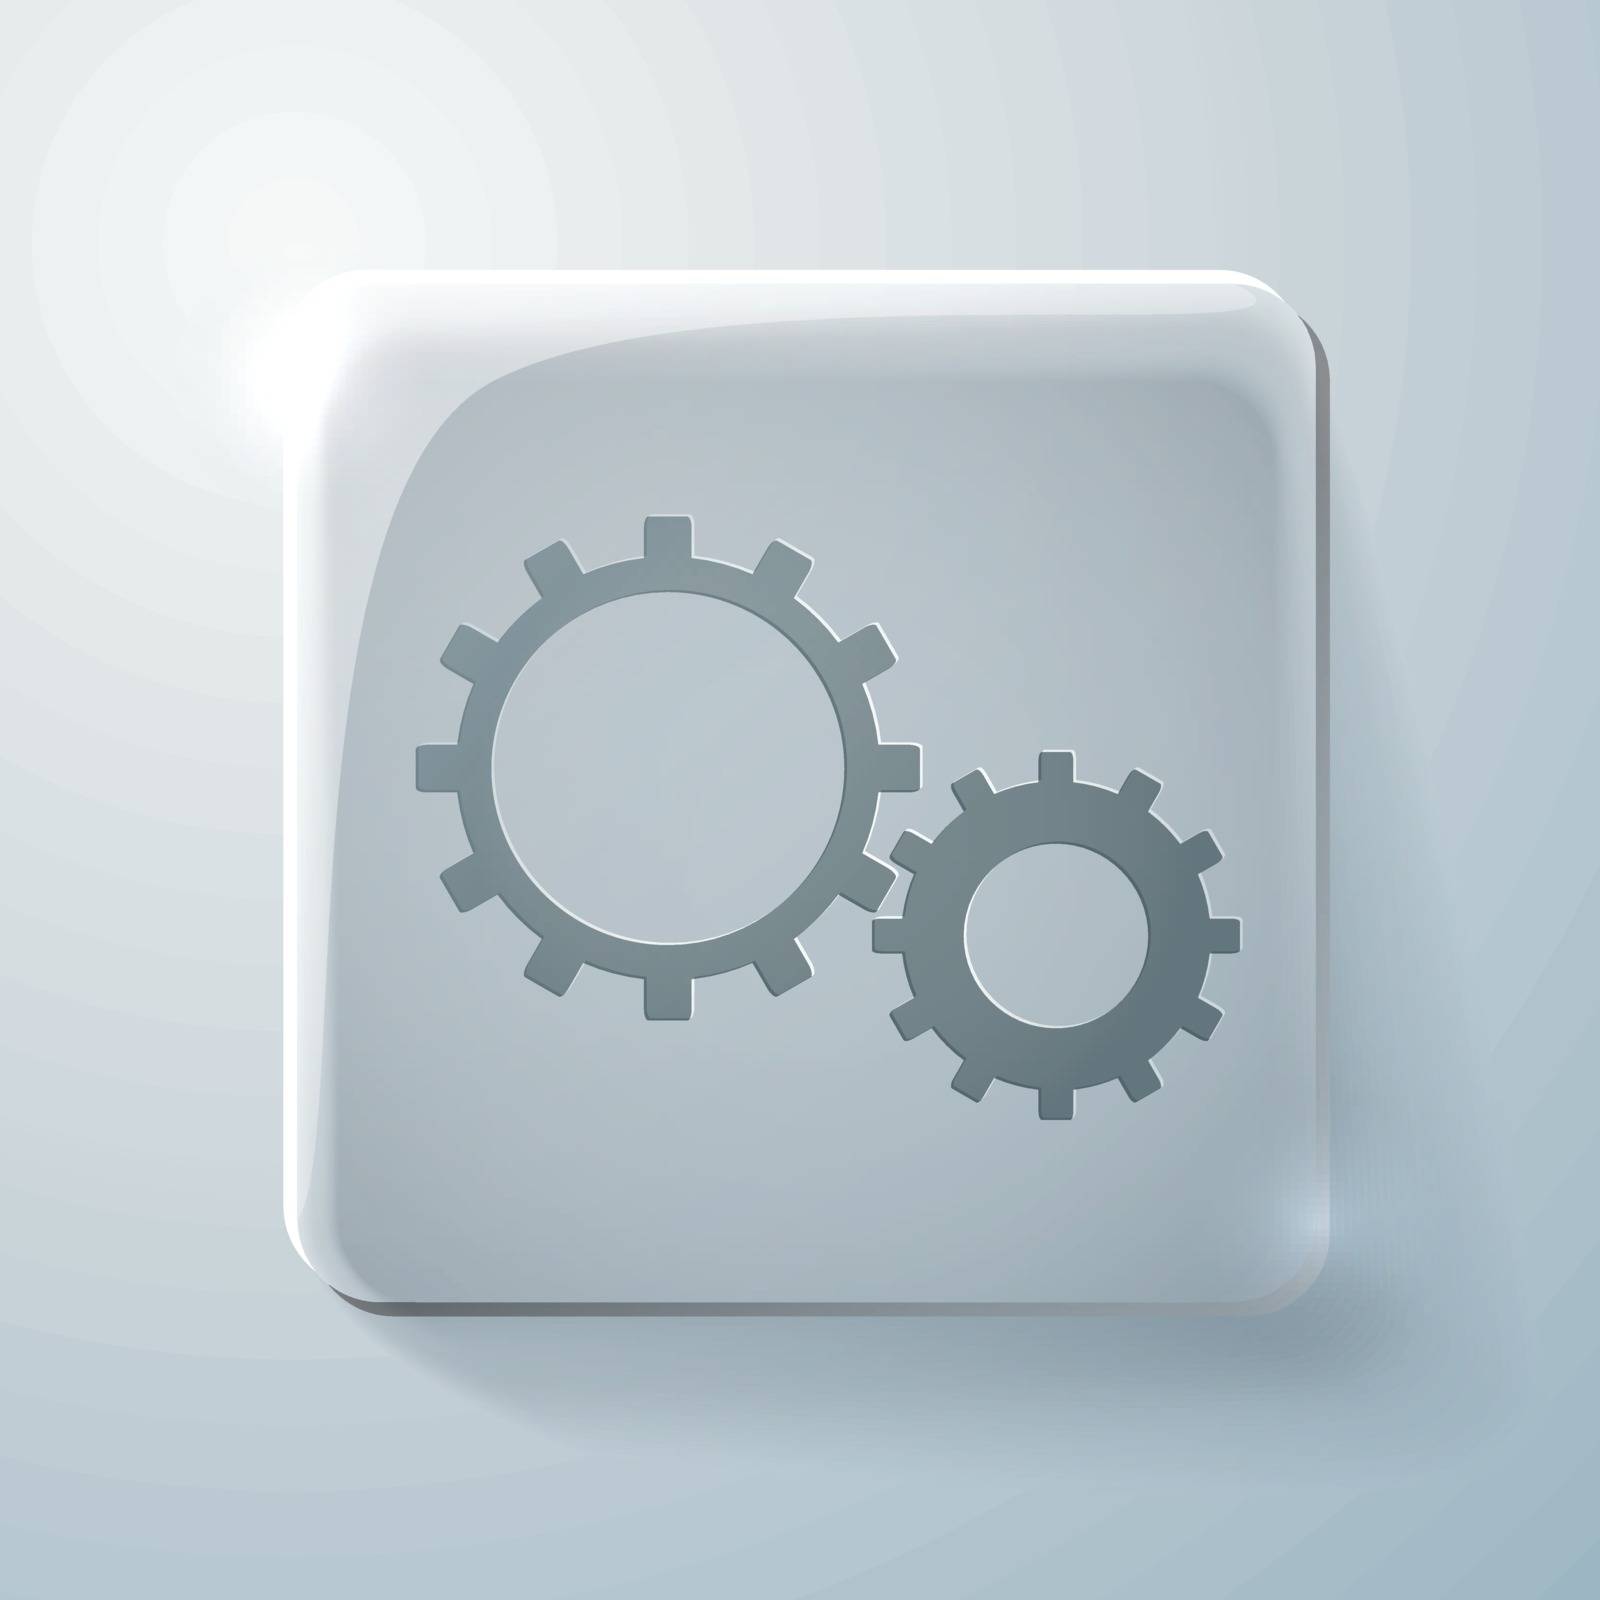 Glass square icon with highlights.  symbol settings. cogwheel